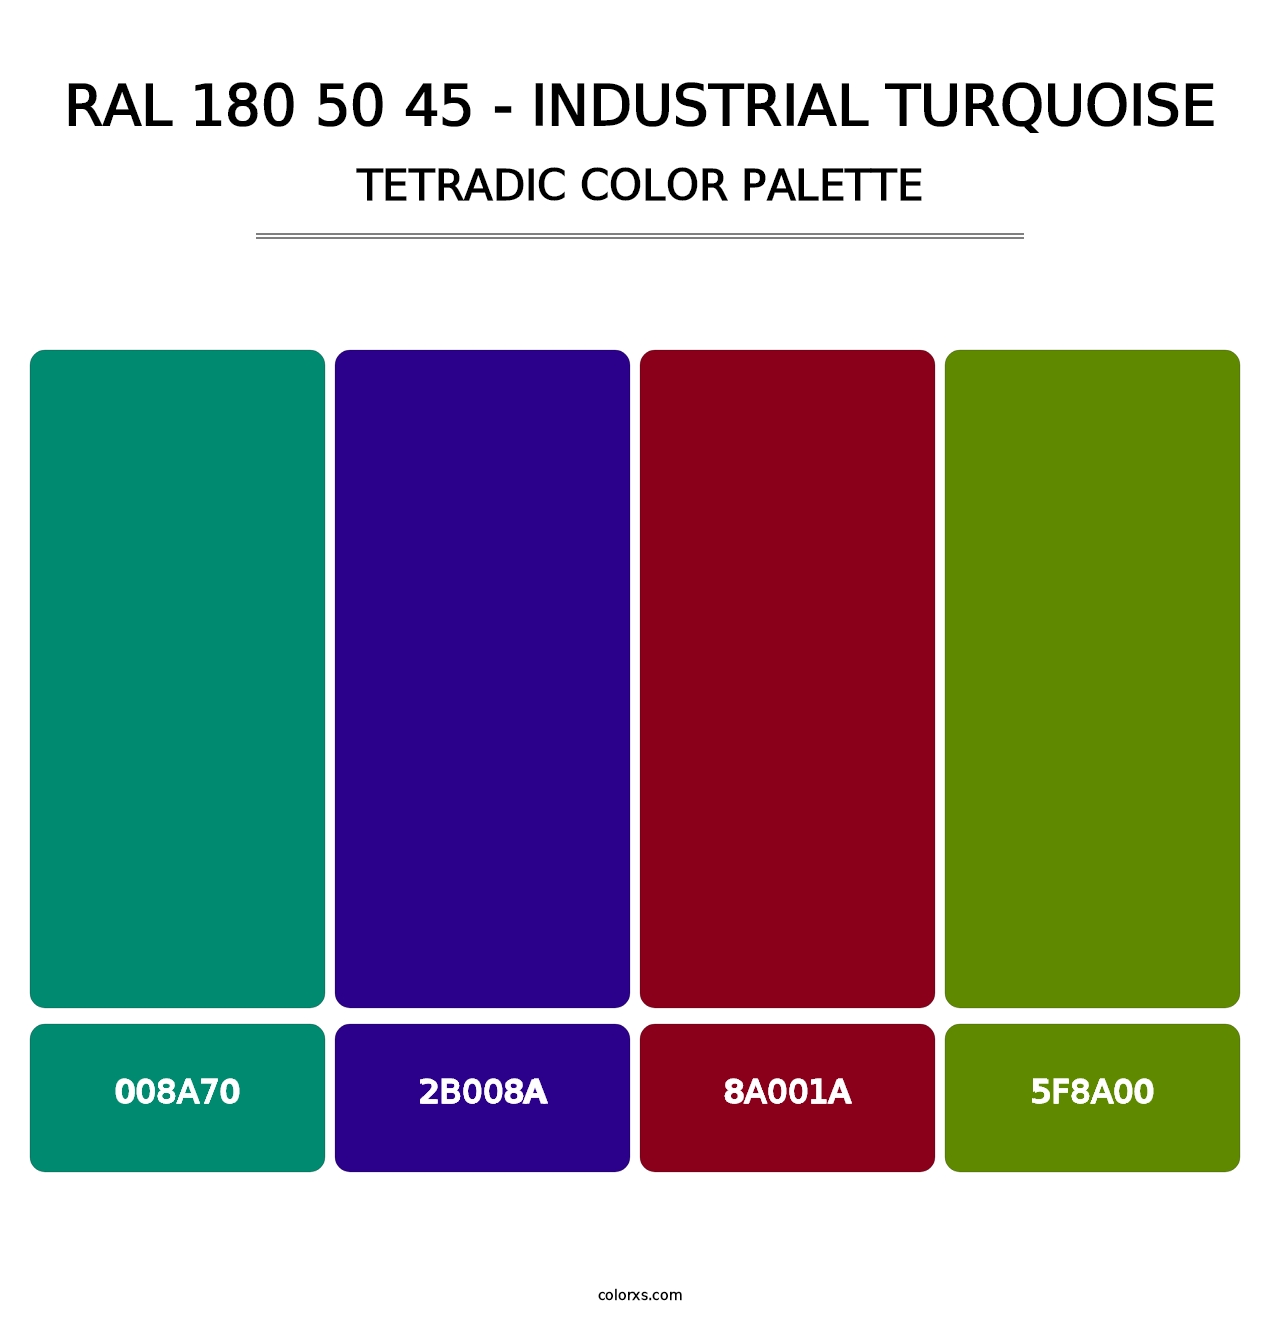 RAL 180 50 45 - Industrial Turquoise - Tetradic Color Palette